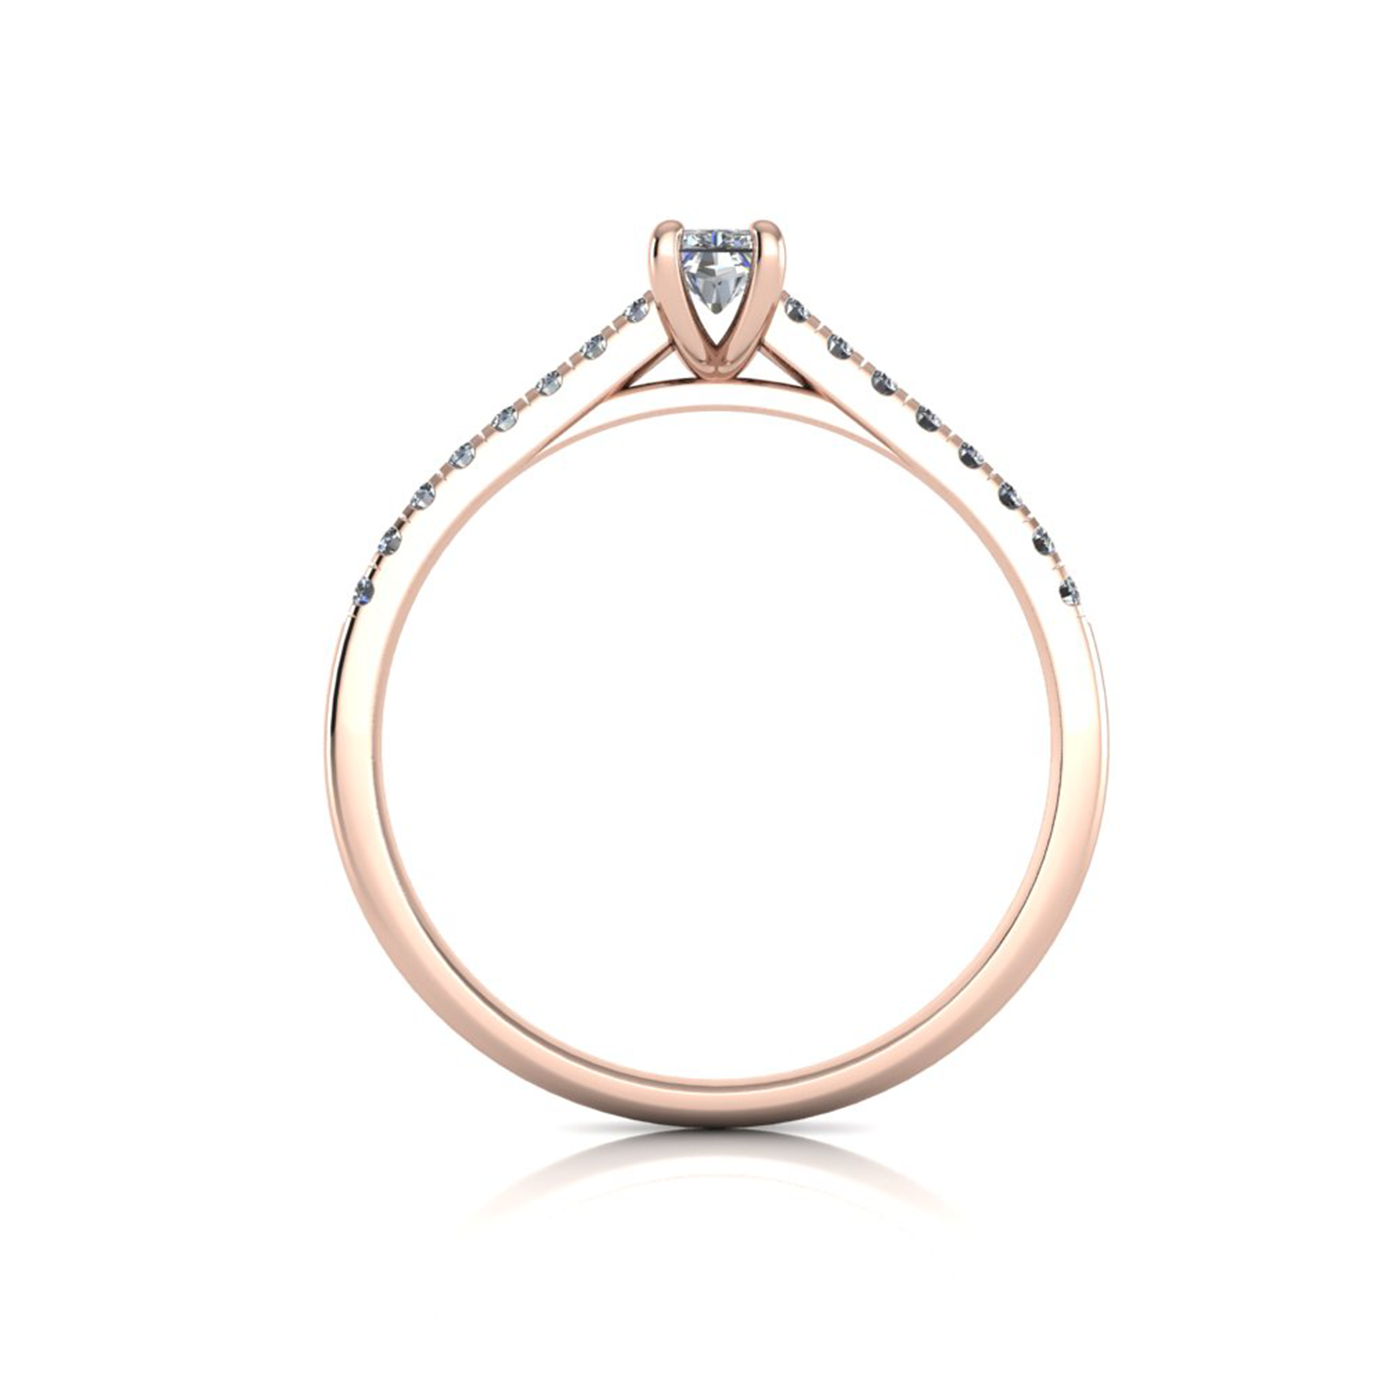 18k rose gold  0,30 ct 4 prongs radiant cut diamond engagement ring with whisper thin pavÉ set band